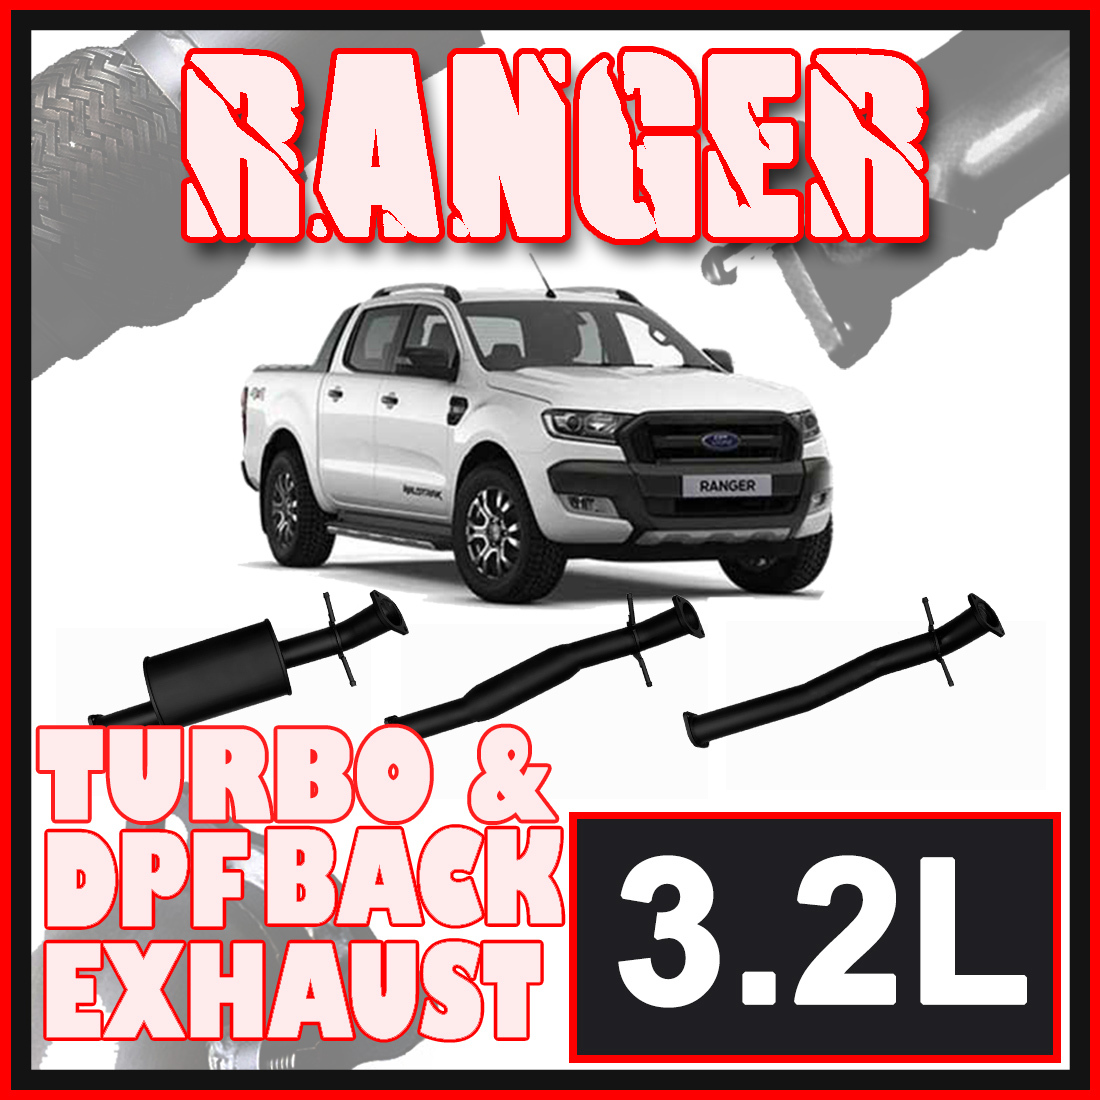 Ford Ranger PX/PX2/PX3 3.2L DPF Model Ignite Exhaust